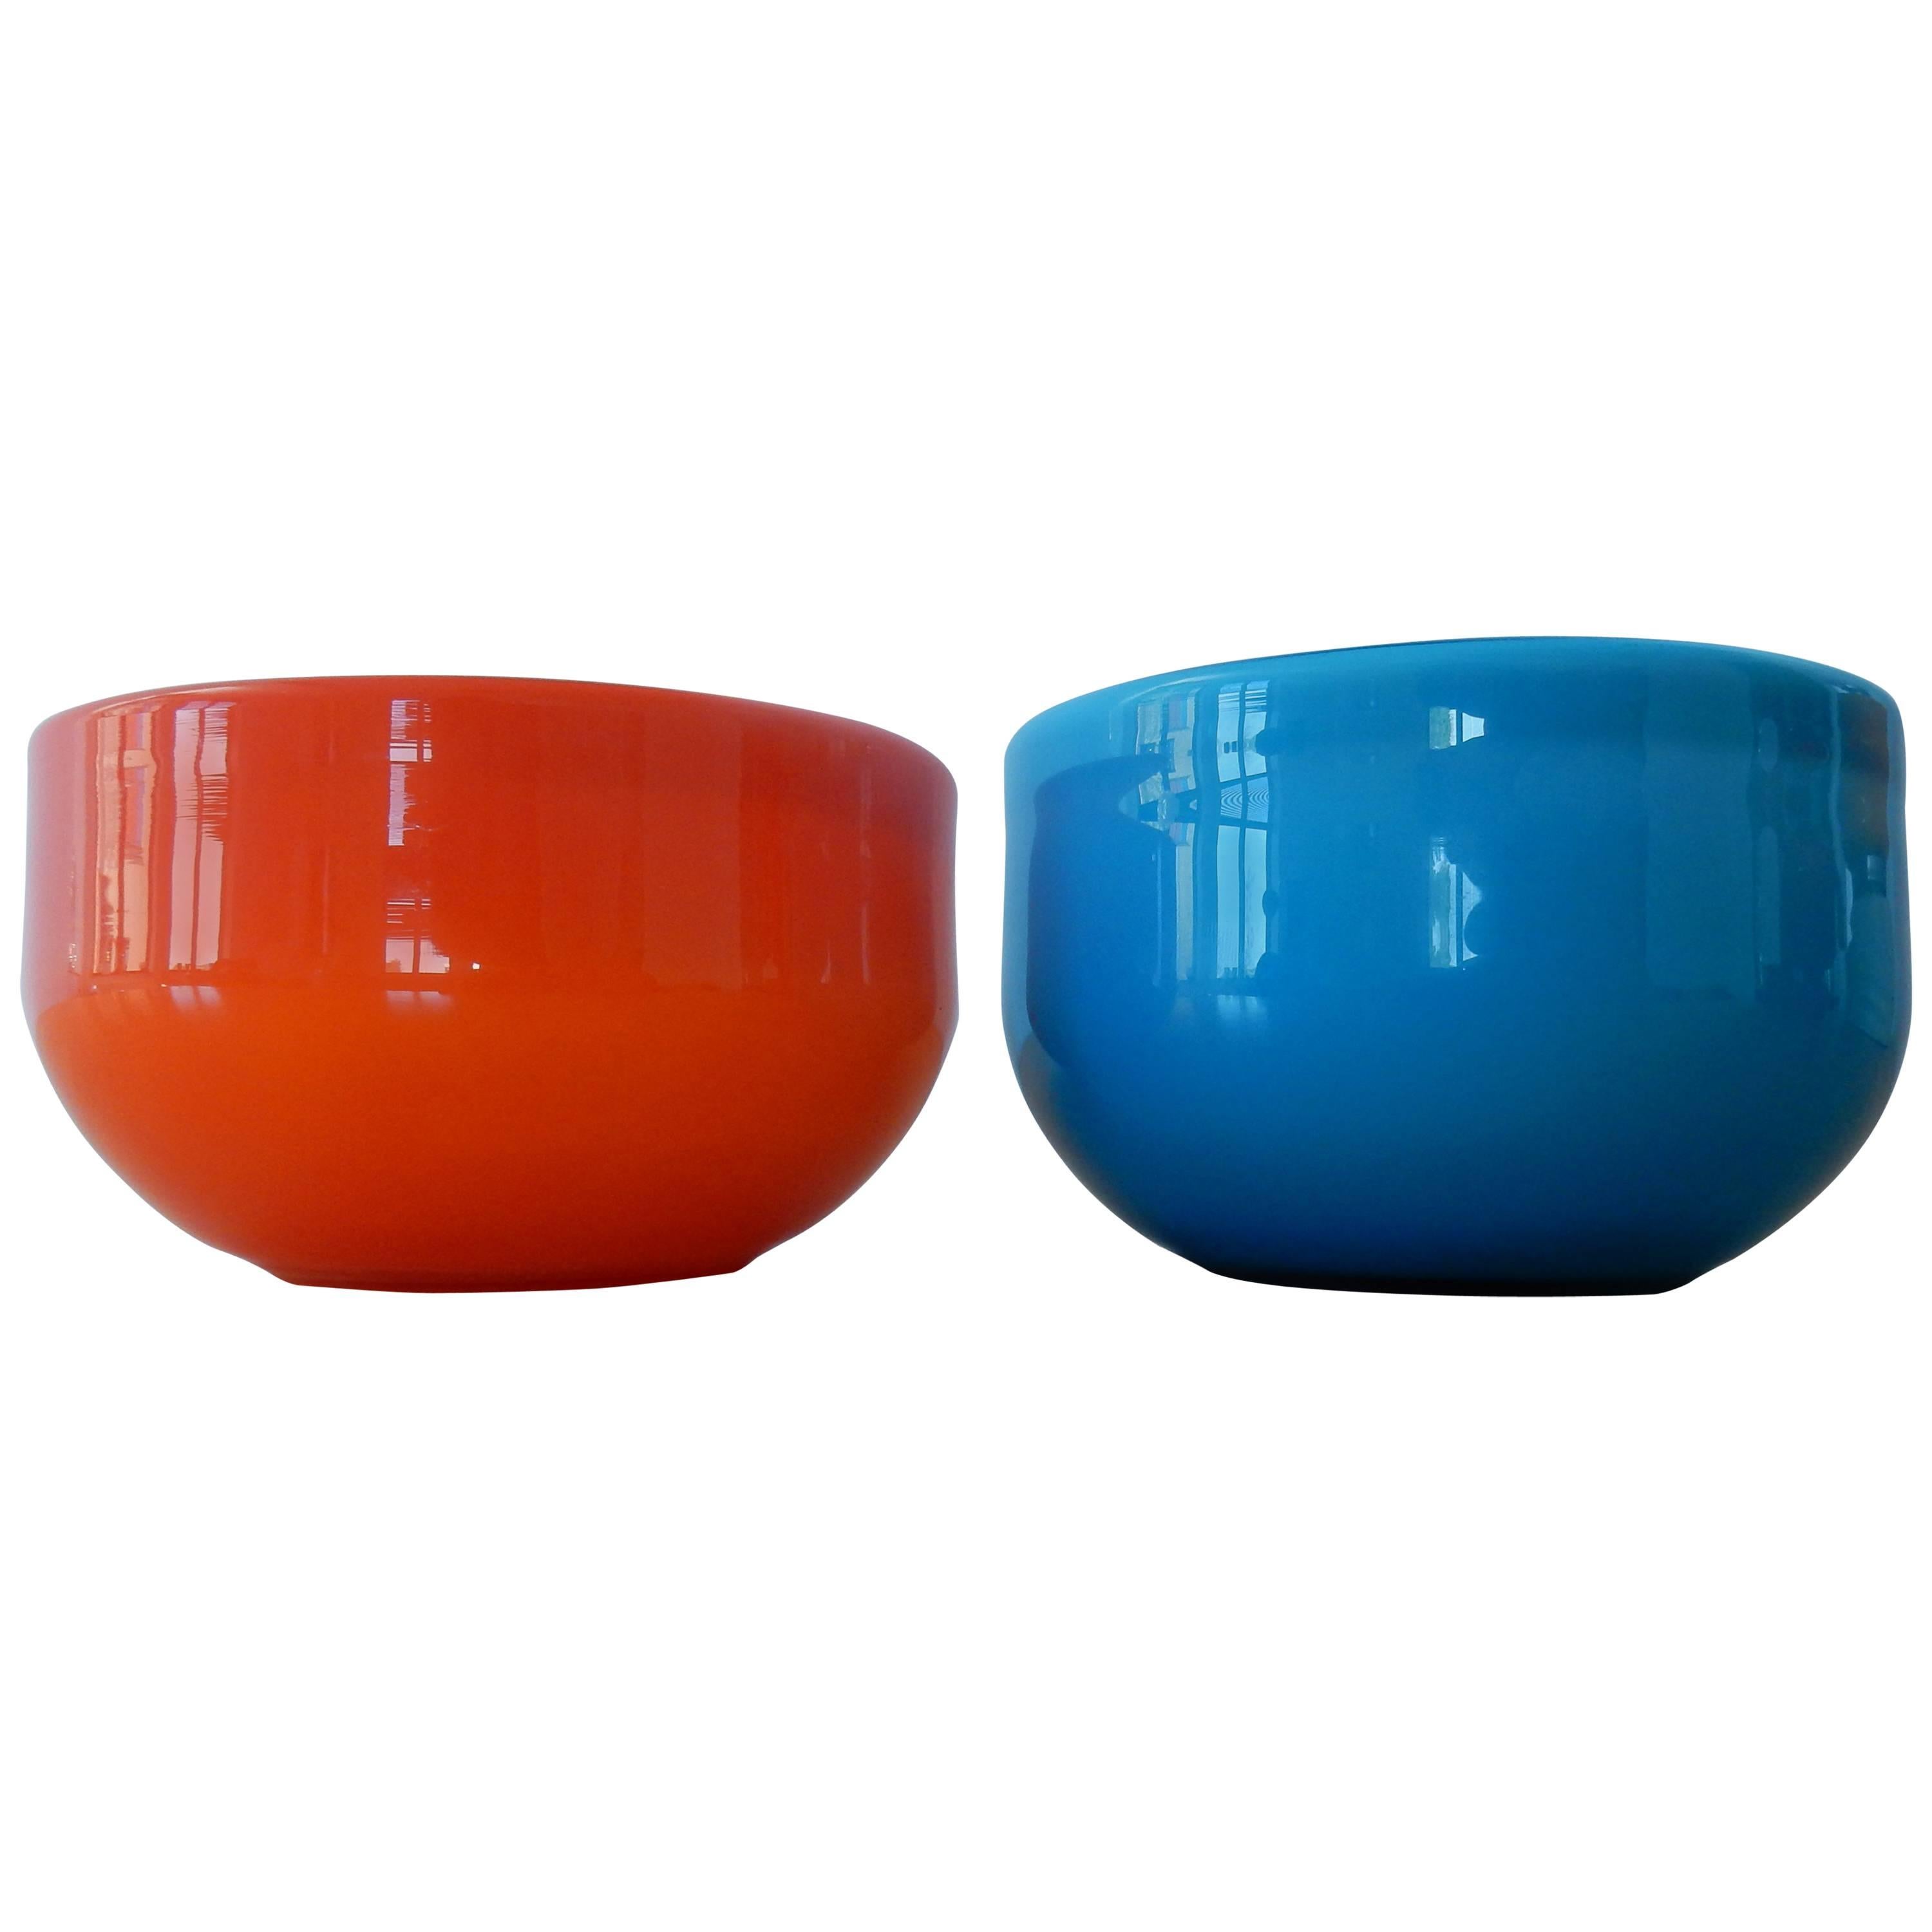 Set of Two 'Palet' Bowls by Michael Bang for Holmegaard, Denmark